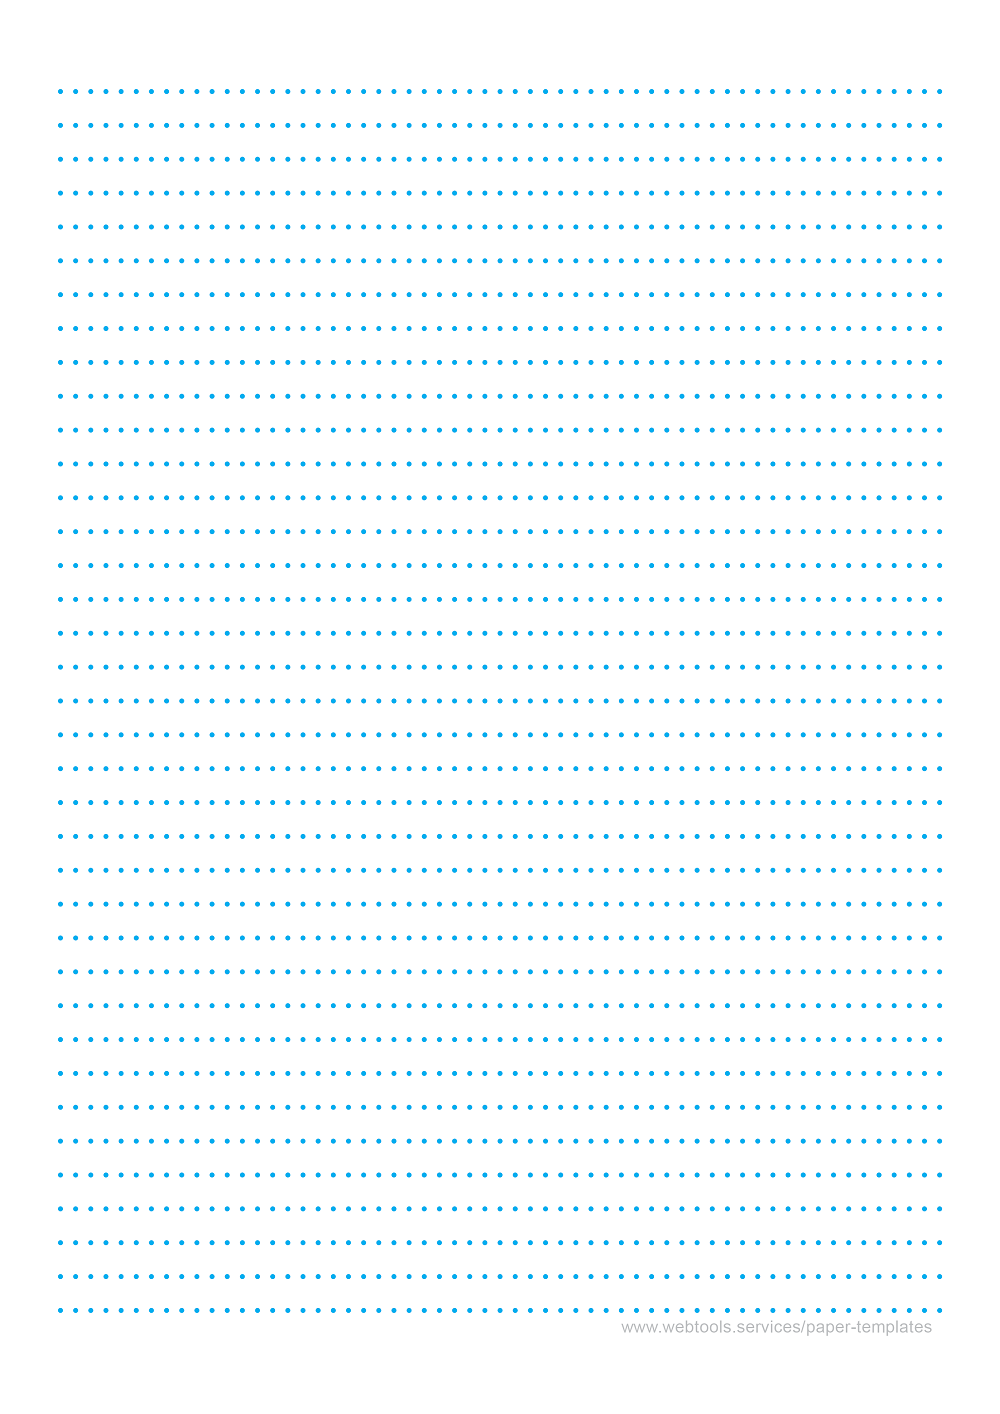 Blue Dotted Line Writing Paper Template With 7_1mm Line Height